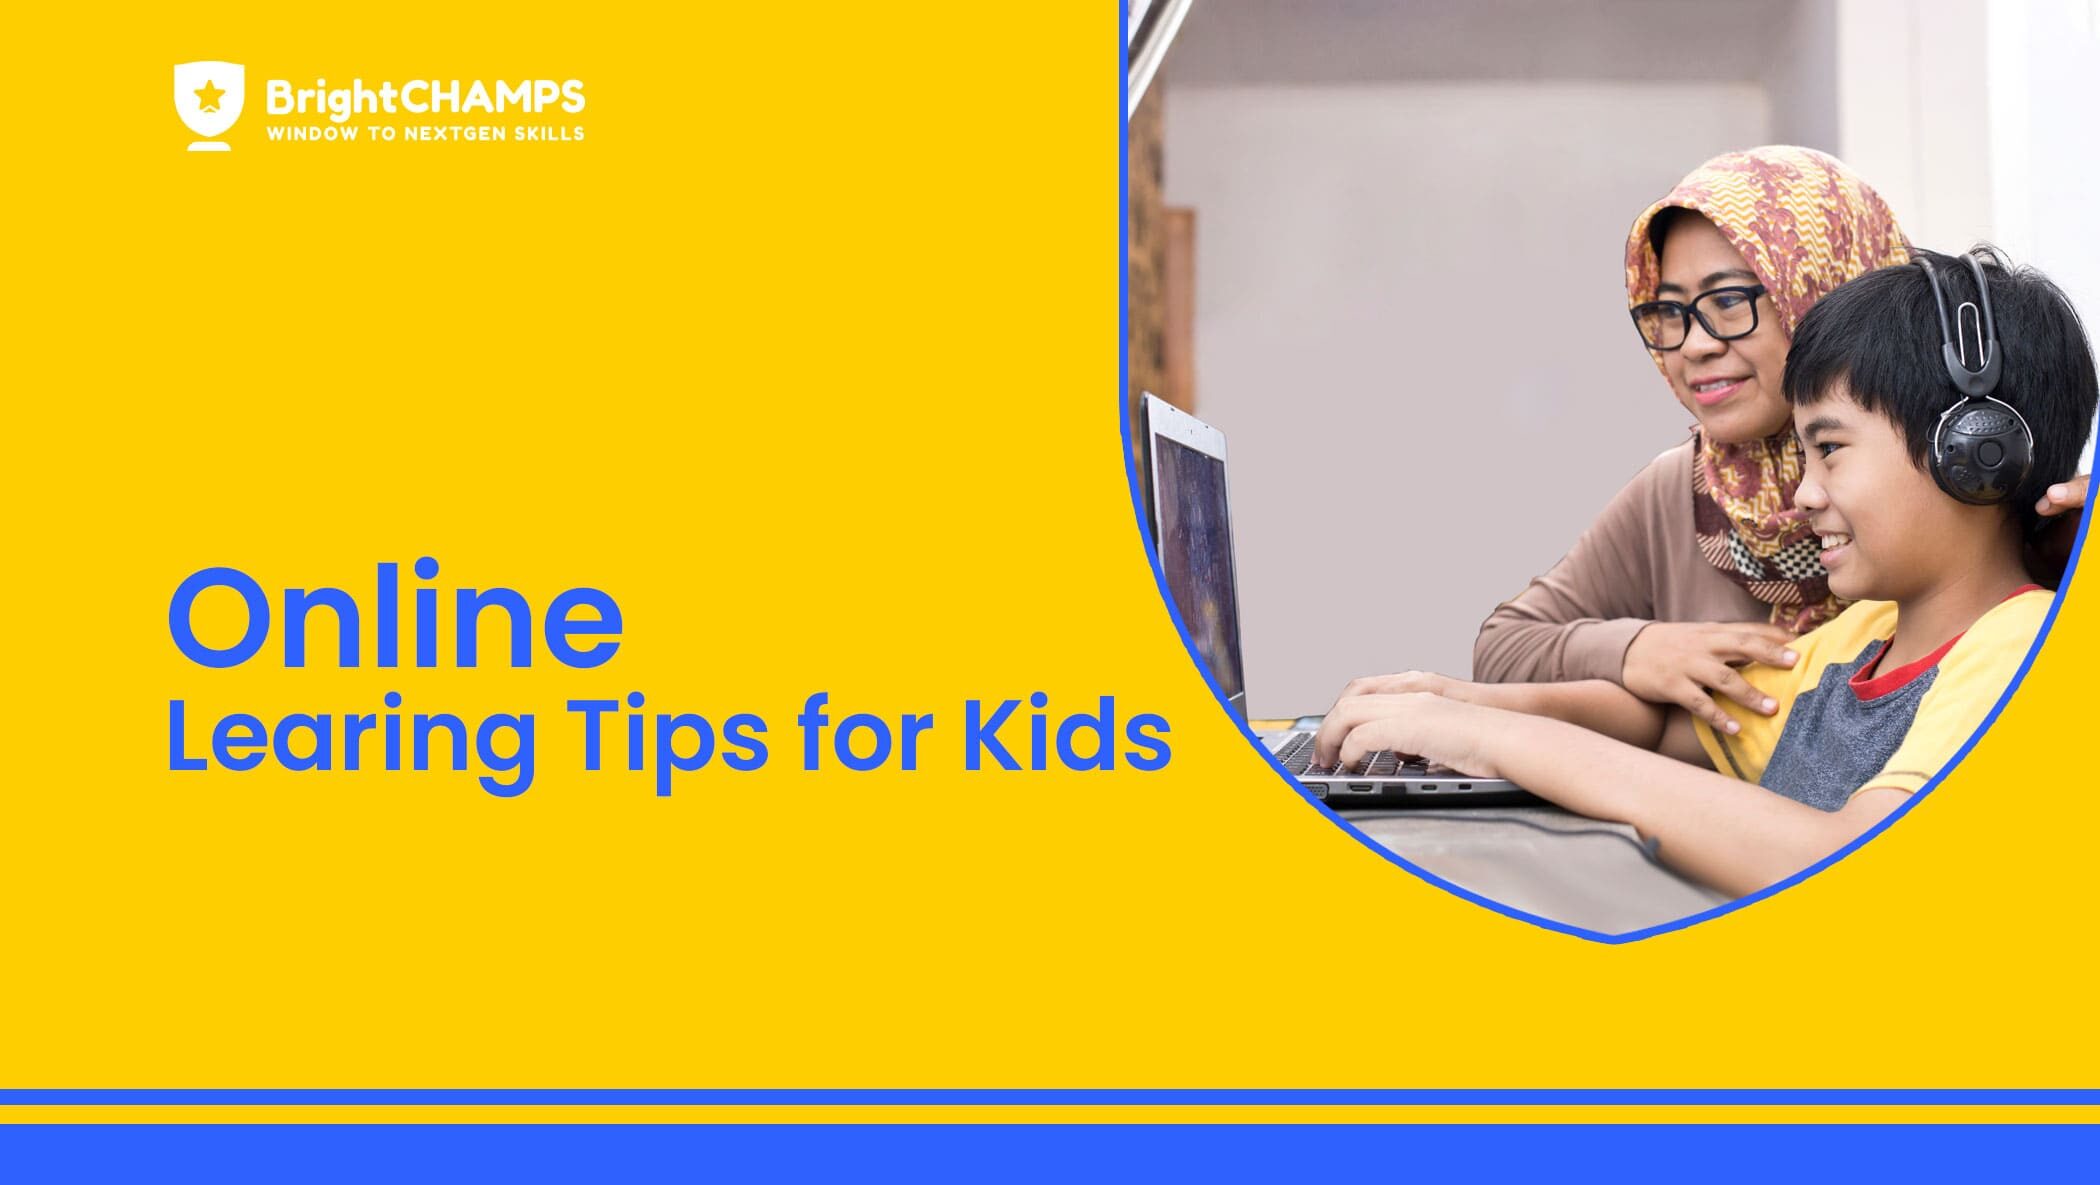 10 Ways Parents can Help Their Kids amidst Online Learning